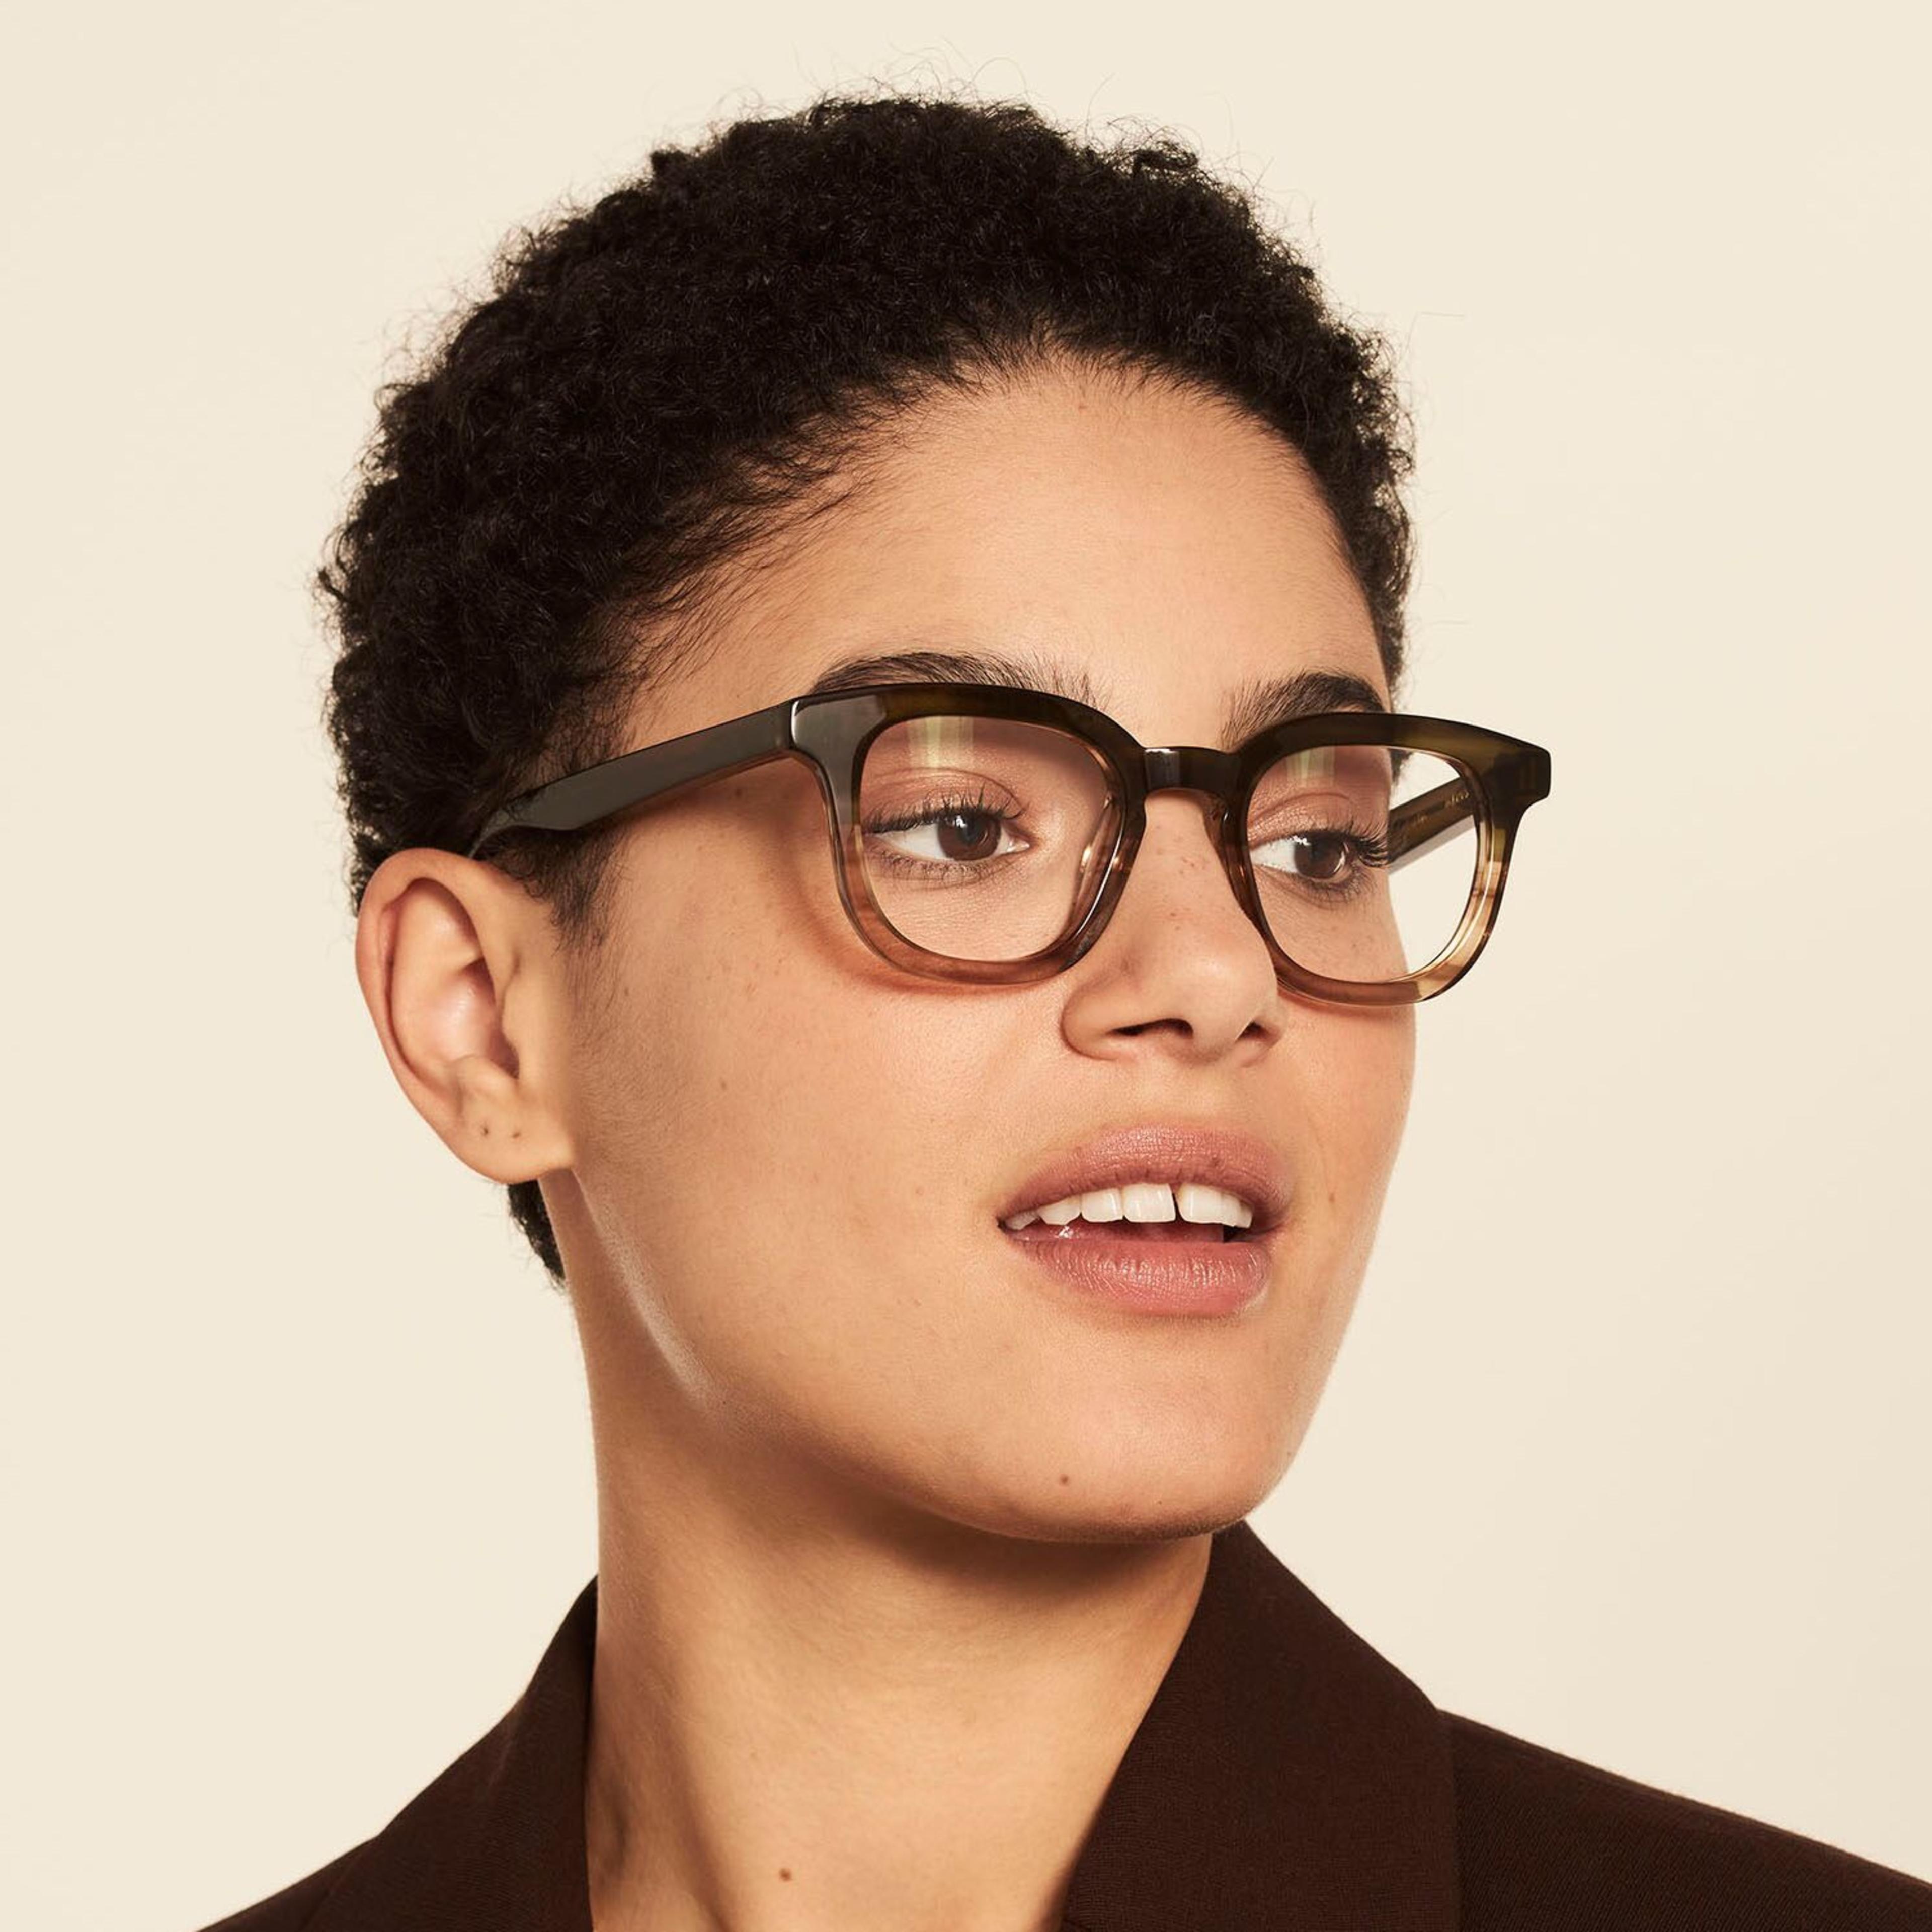 Ace & Tate Glasses | Square Acetate in Brown, Green